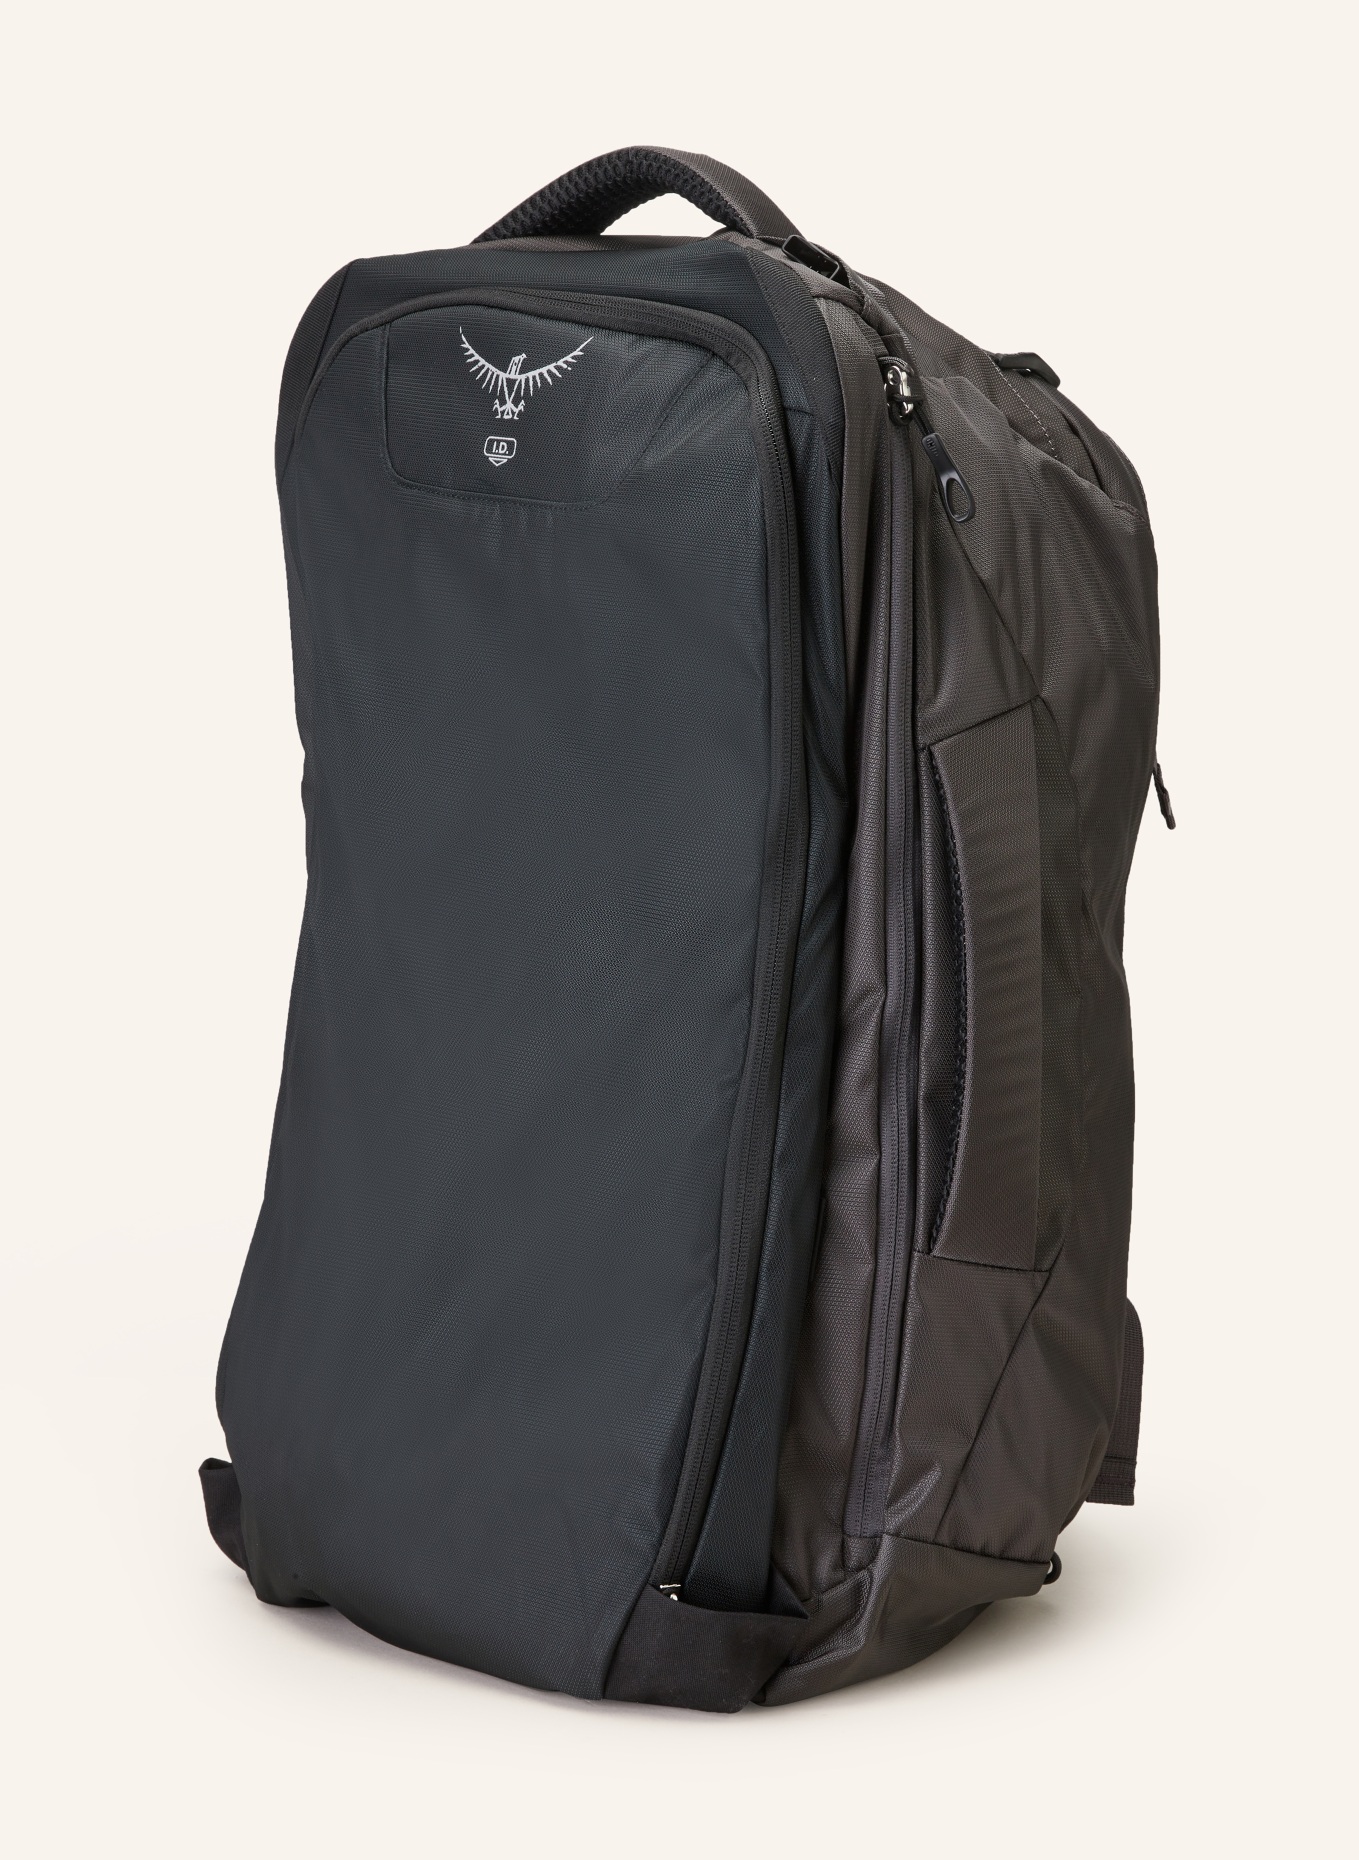 OSPREY Backpack FARPOINT™ 40 l with laptop compartment, Color: GRAY (Image 2)